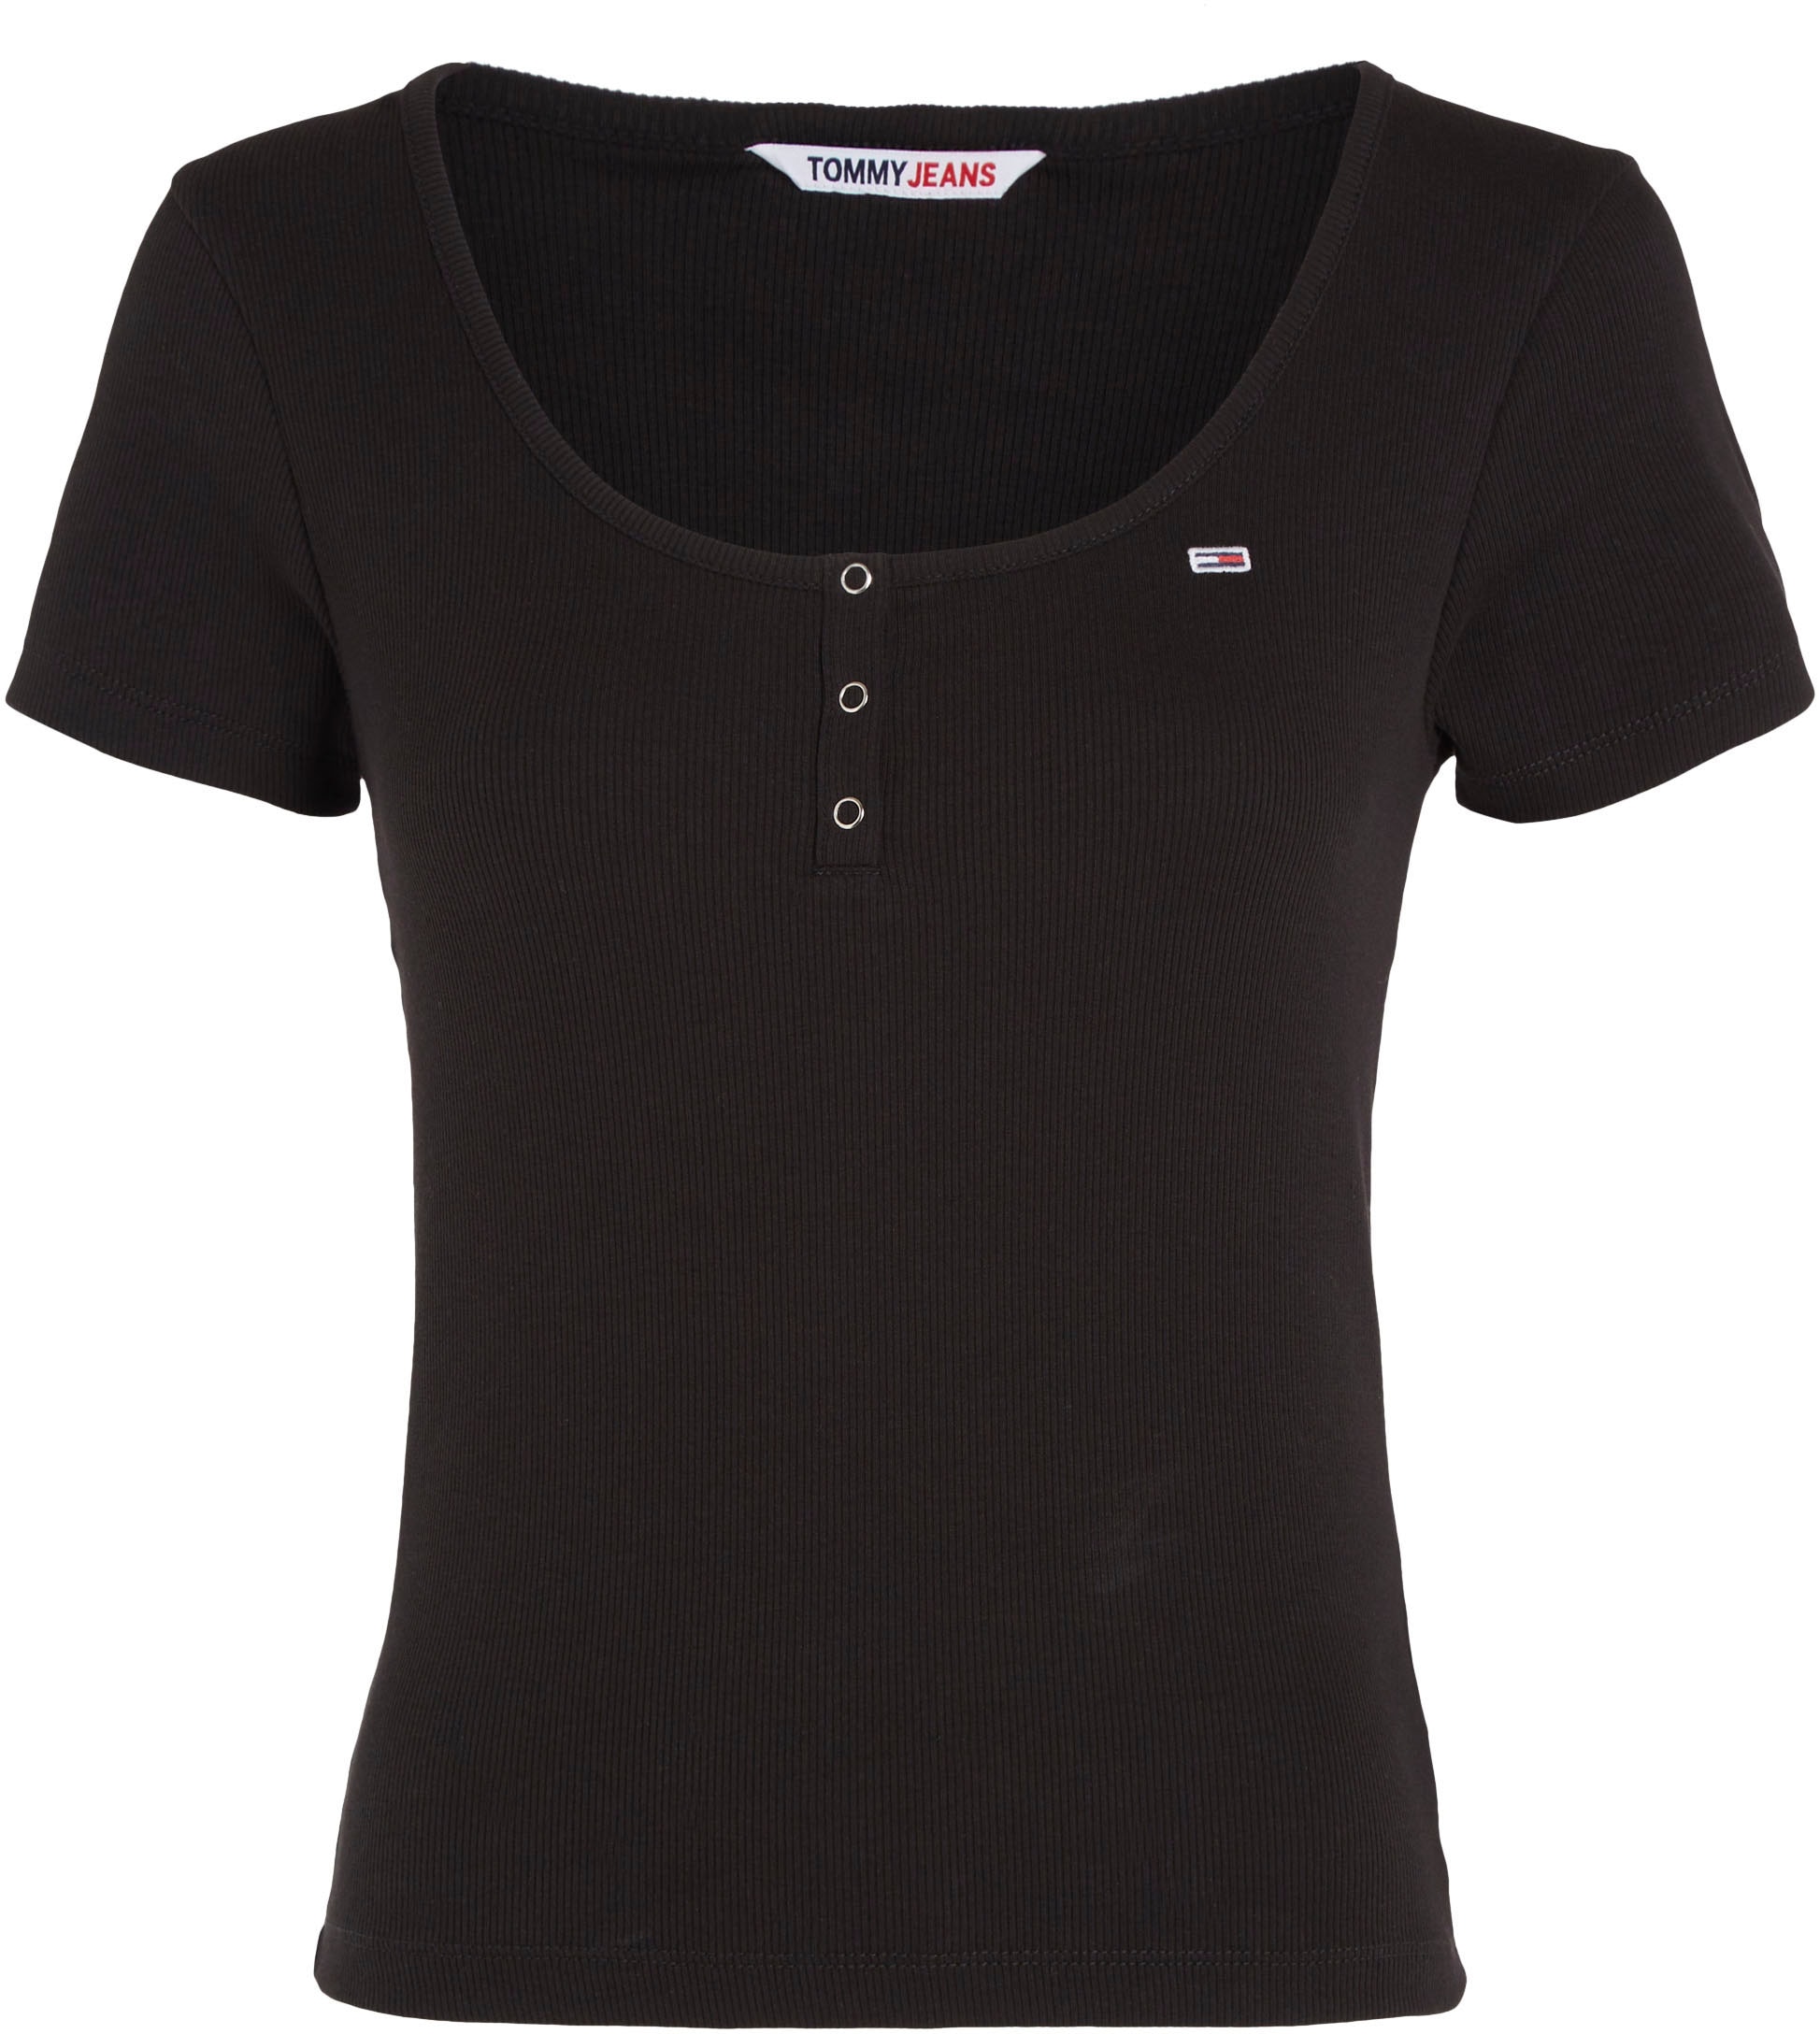 Tommy Jeans T-Shirt »TJW ♕ RIB BUTTON mit BBY Jeans C-NECK«, Logostickerei Tommy bei